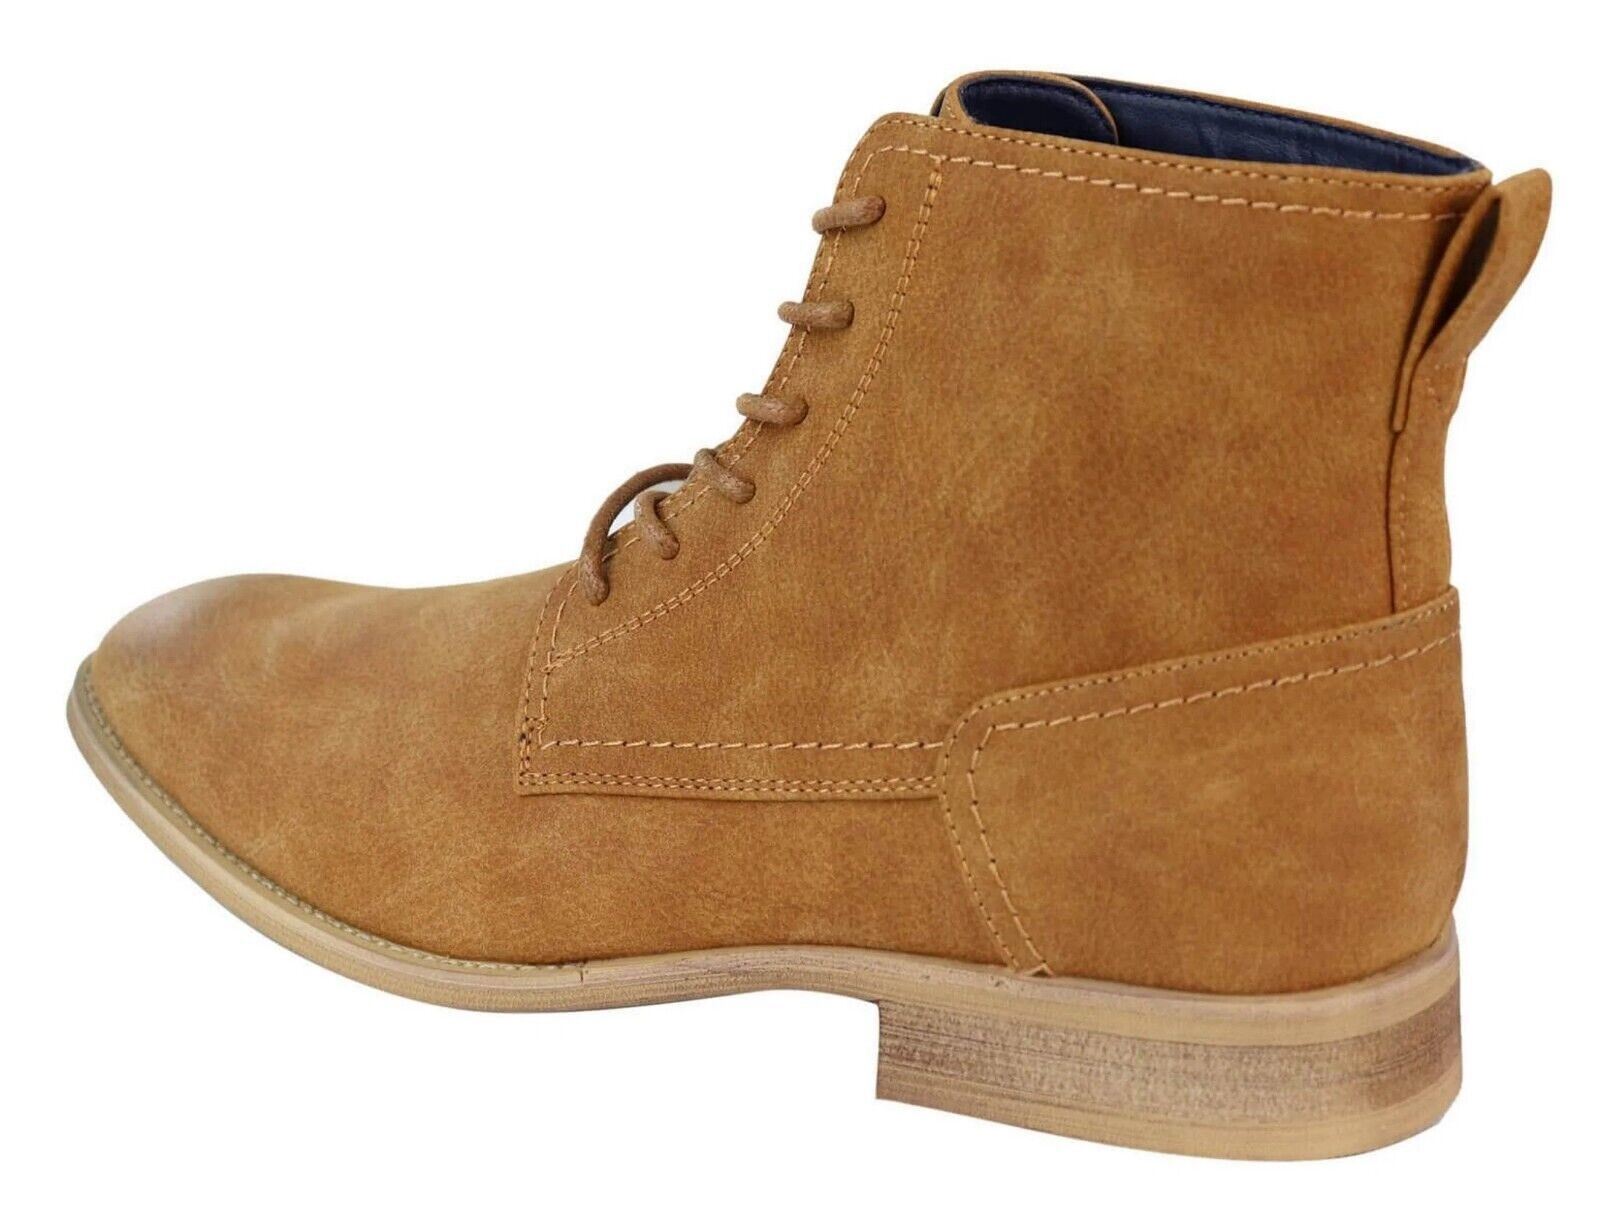 Mens Camel Matt Suede Lace Up Ankle Boots - Upperclass Fashions 